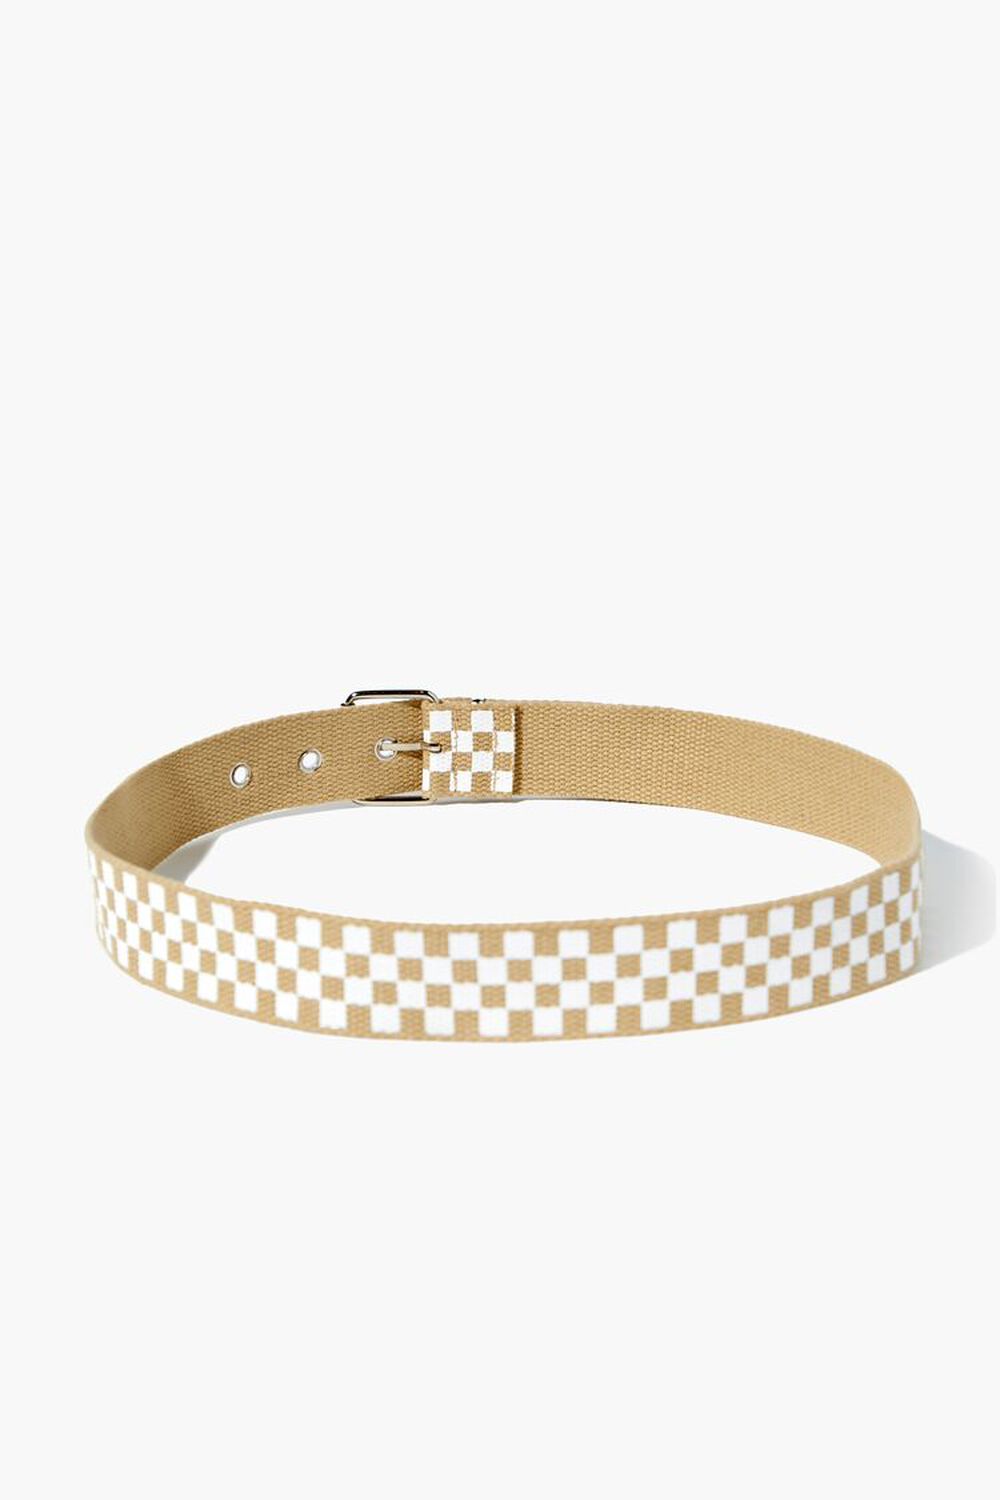 Forever 21 Women's Checkered Print Belt in Tan/White, M/L | Back to School Essentials | F21